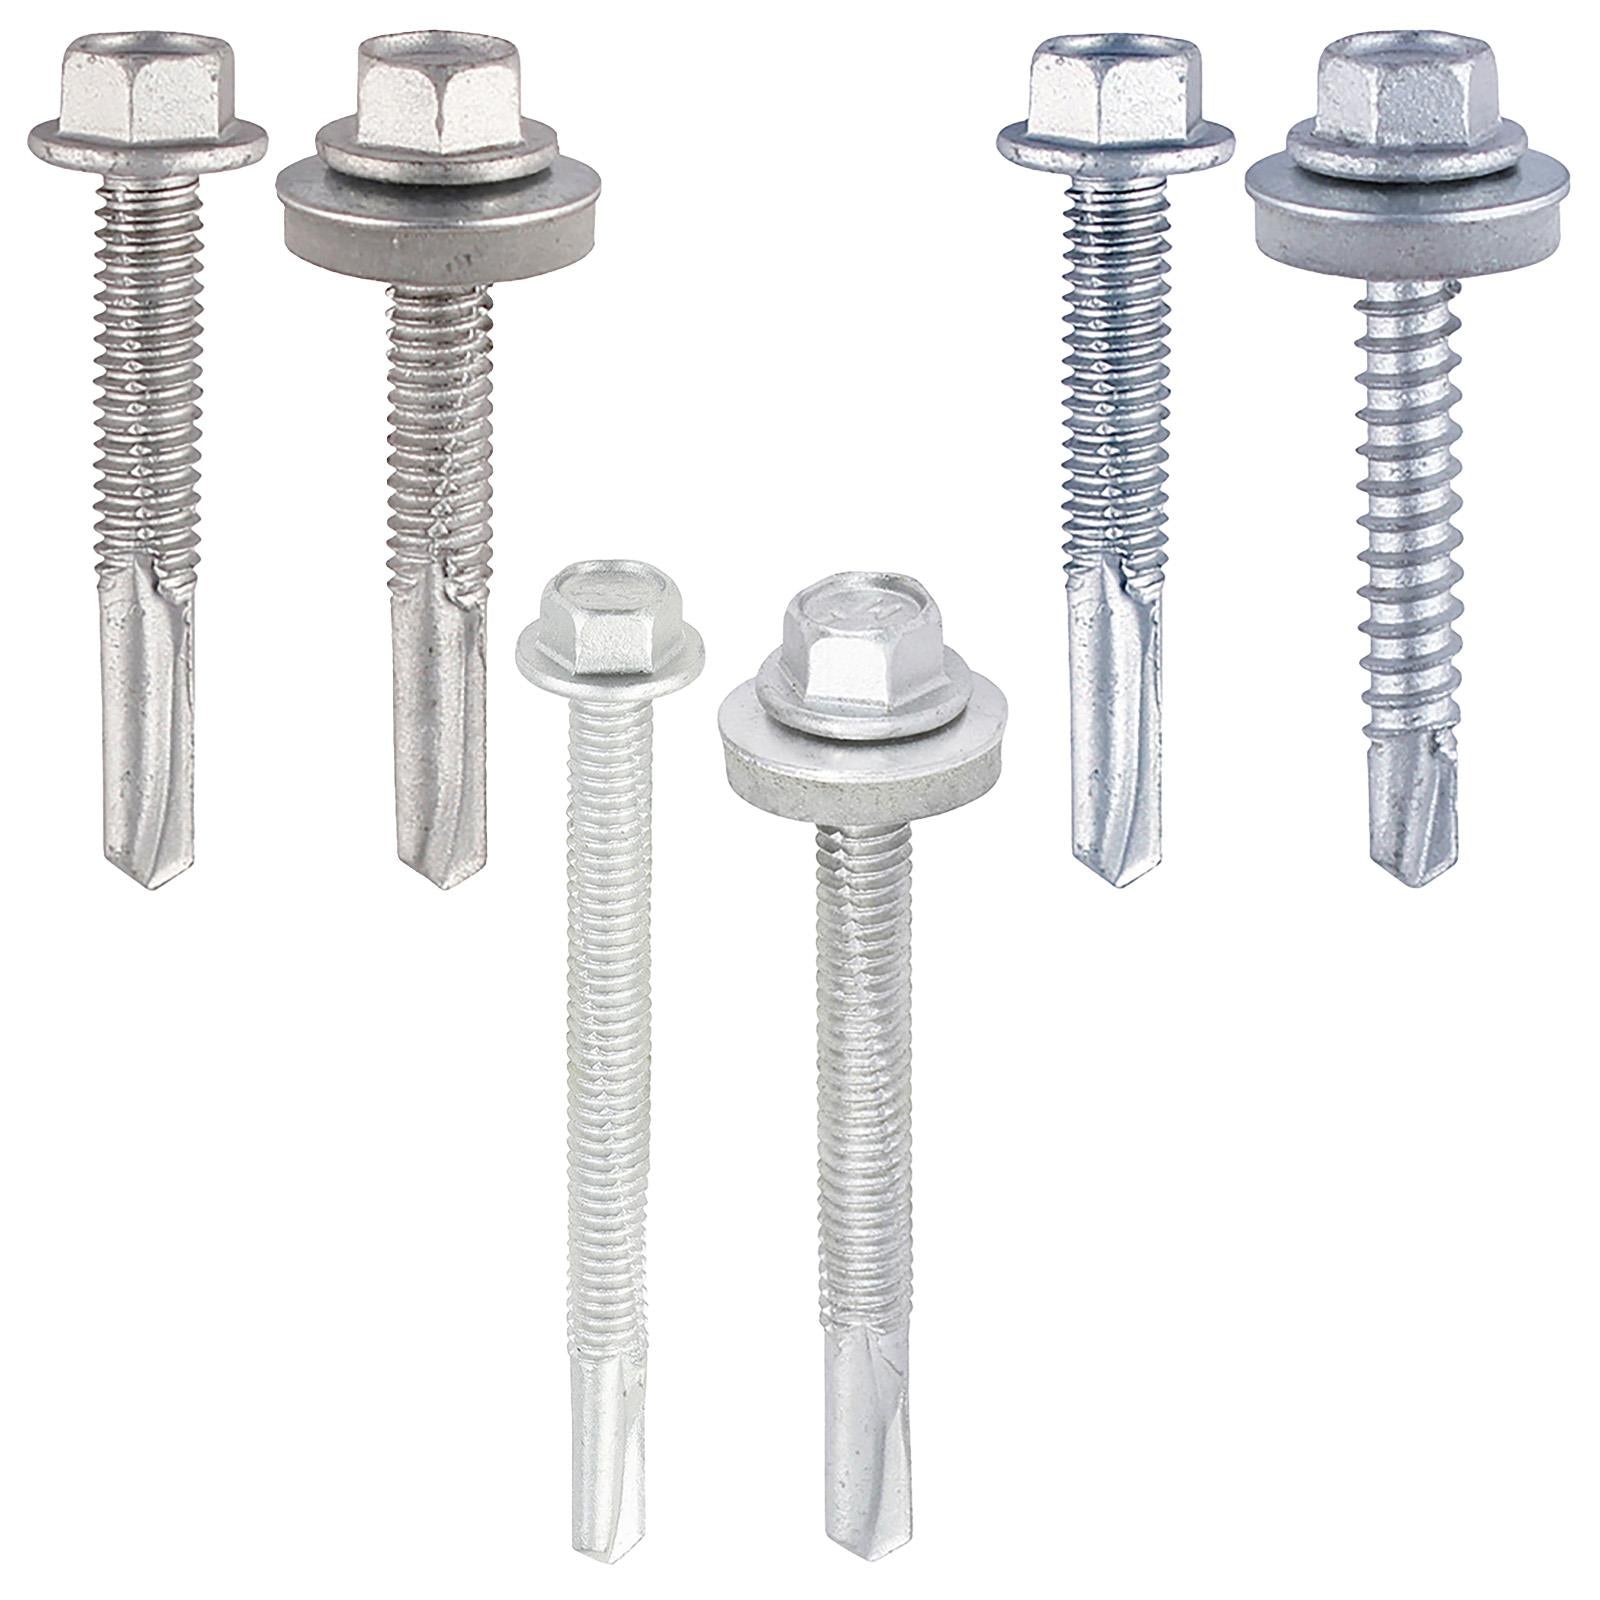 TIMCO Self Drilling Construction Screw for Heavy Section Steel with or without EPDM Washer Bi-Metal Exterior Zinc -Choose Size